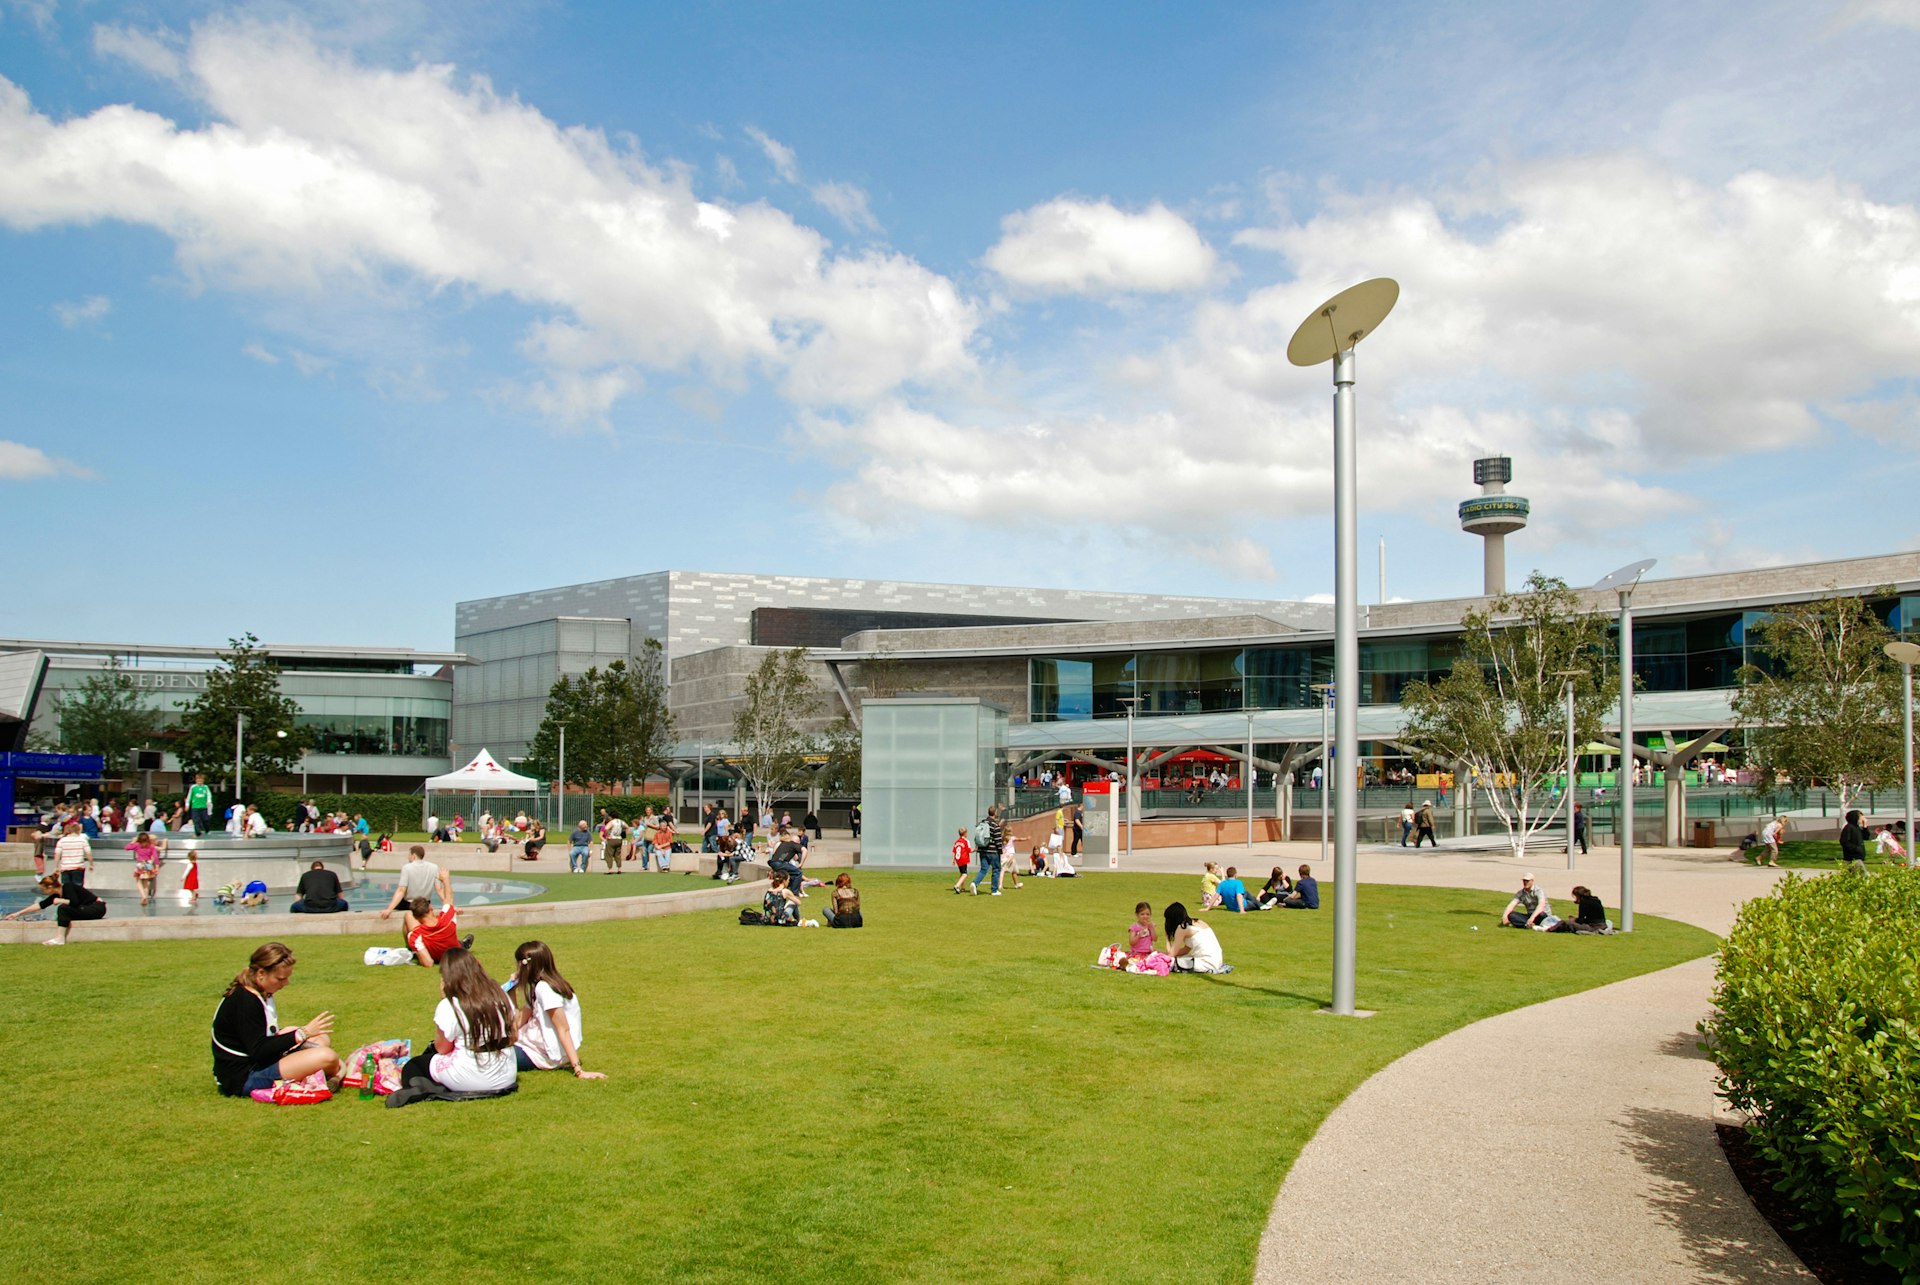 People sitting in the grass in Chavasse Park in Liverpool, England, on a sunny day